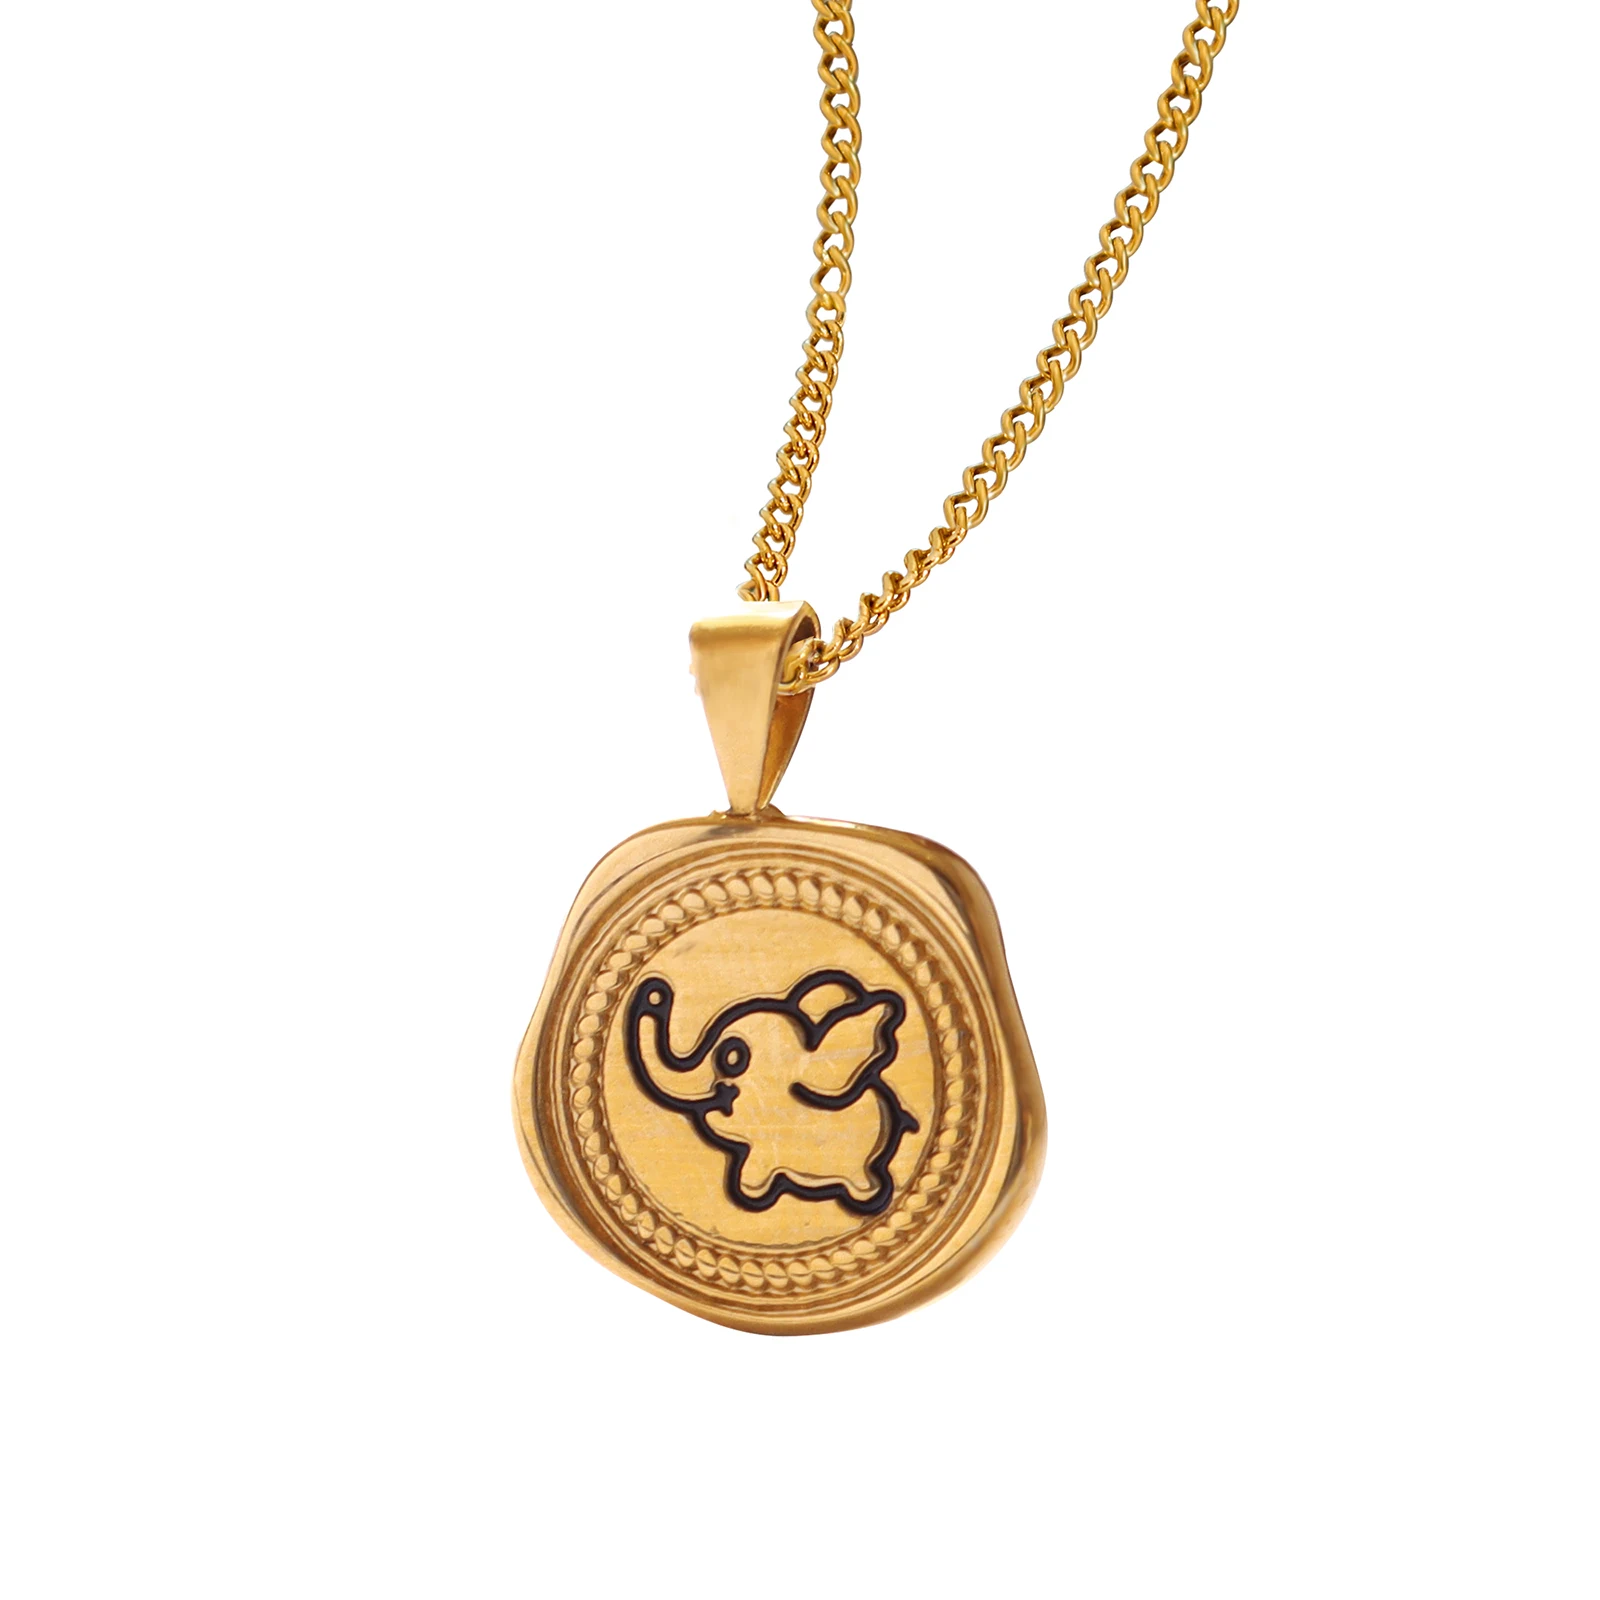 JoyEver Stainless Steel Jewelry Round Brand Animal Elephant Shaped Gold Coin Pendant Necklace